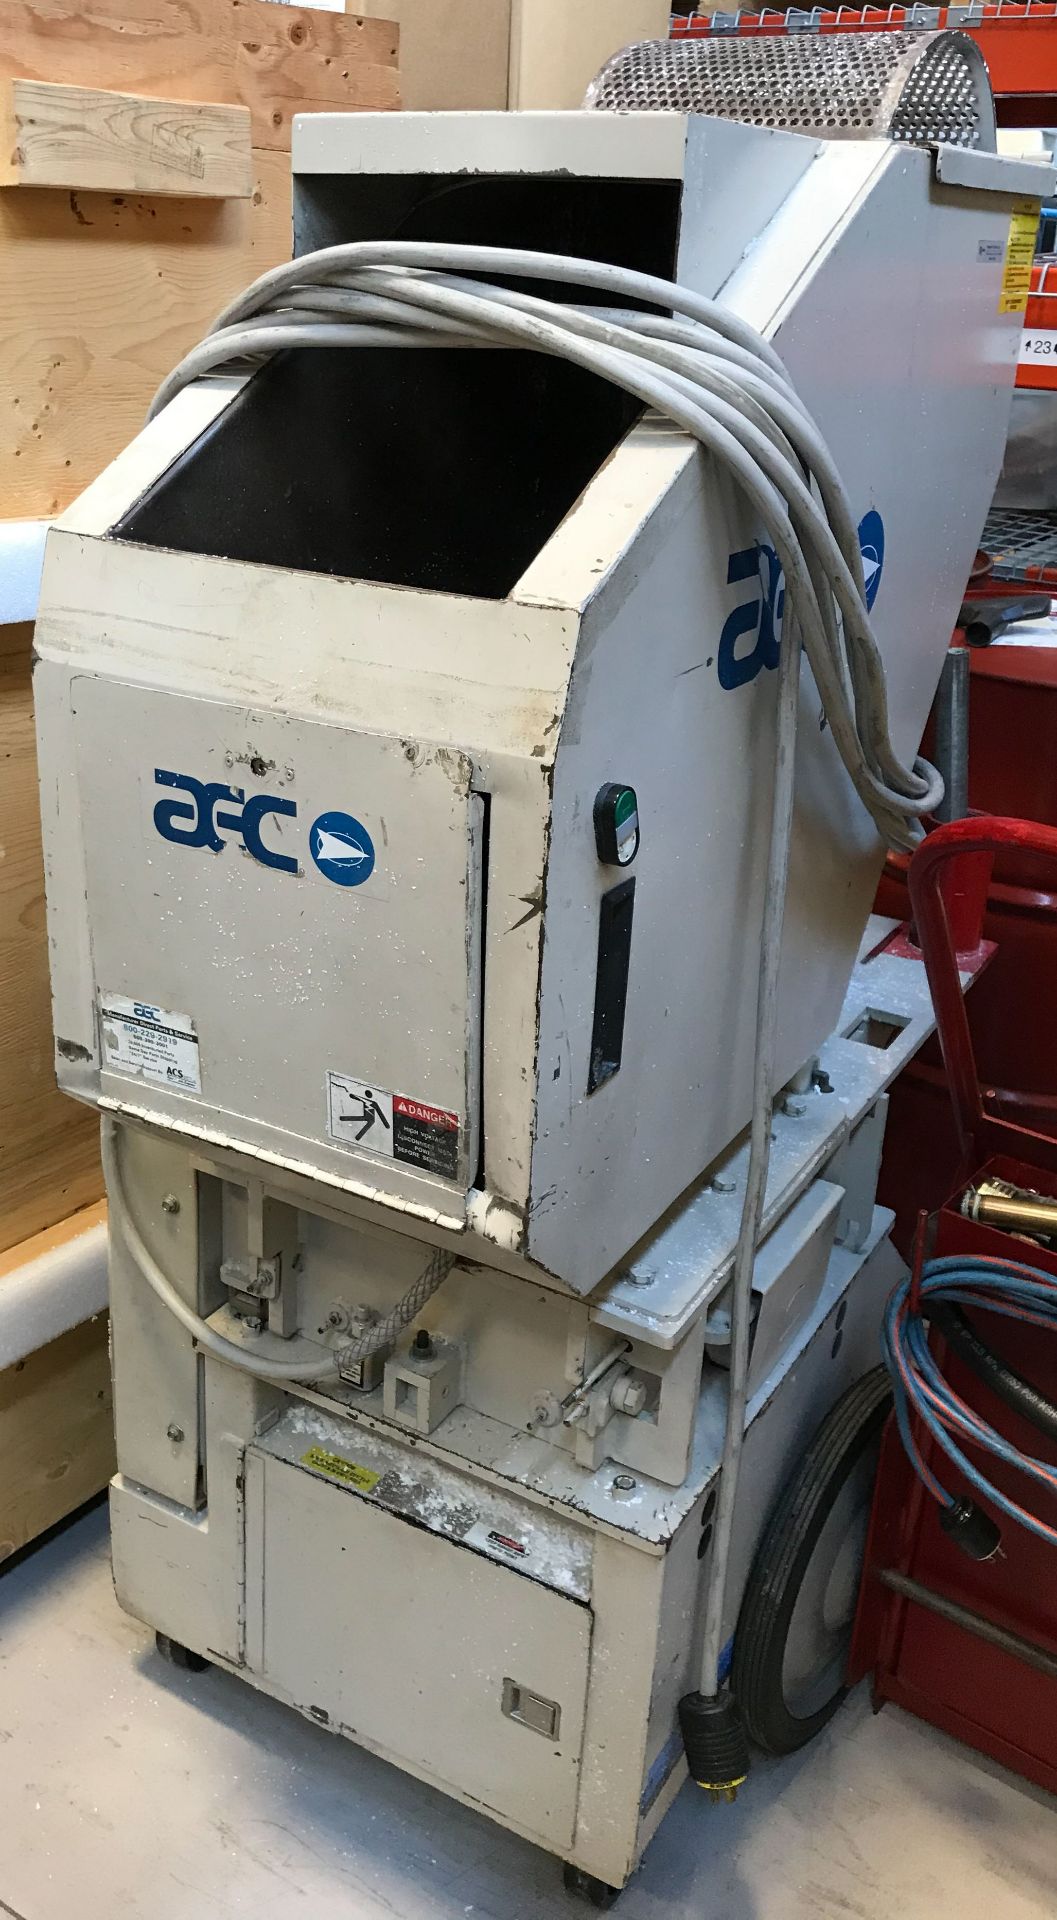 AEC PORTABLE PLASTIC GRINDING MACHINE, S/N: N/A [RIGGING FEES FOR LOT# 19 - $25 USD PLUS